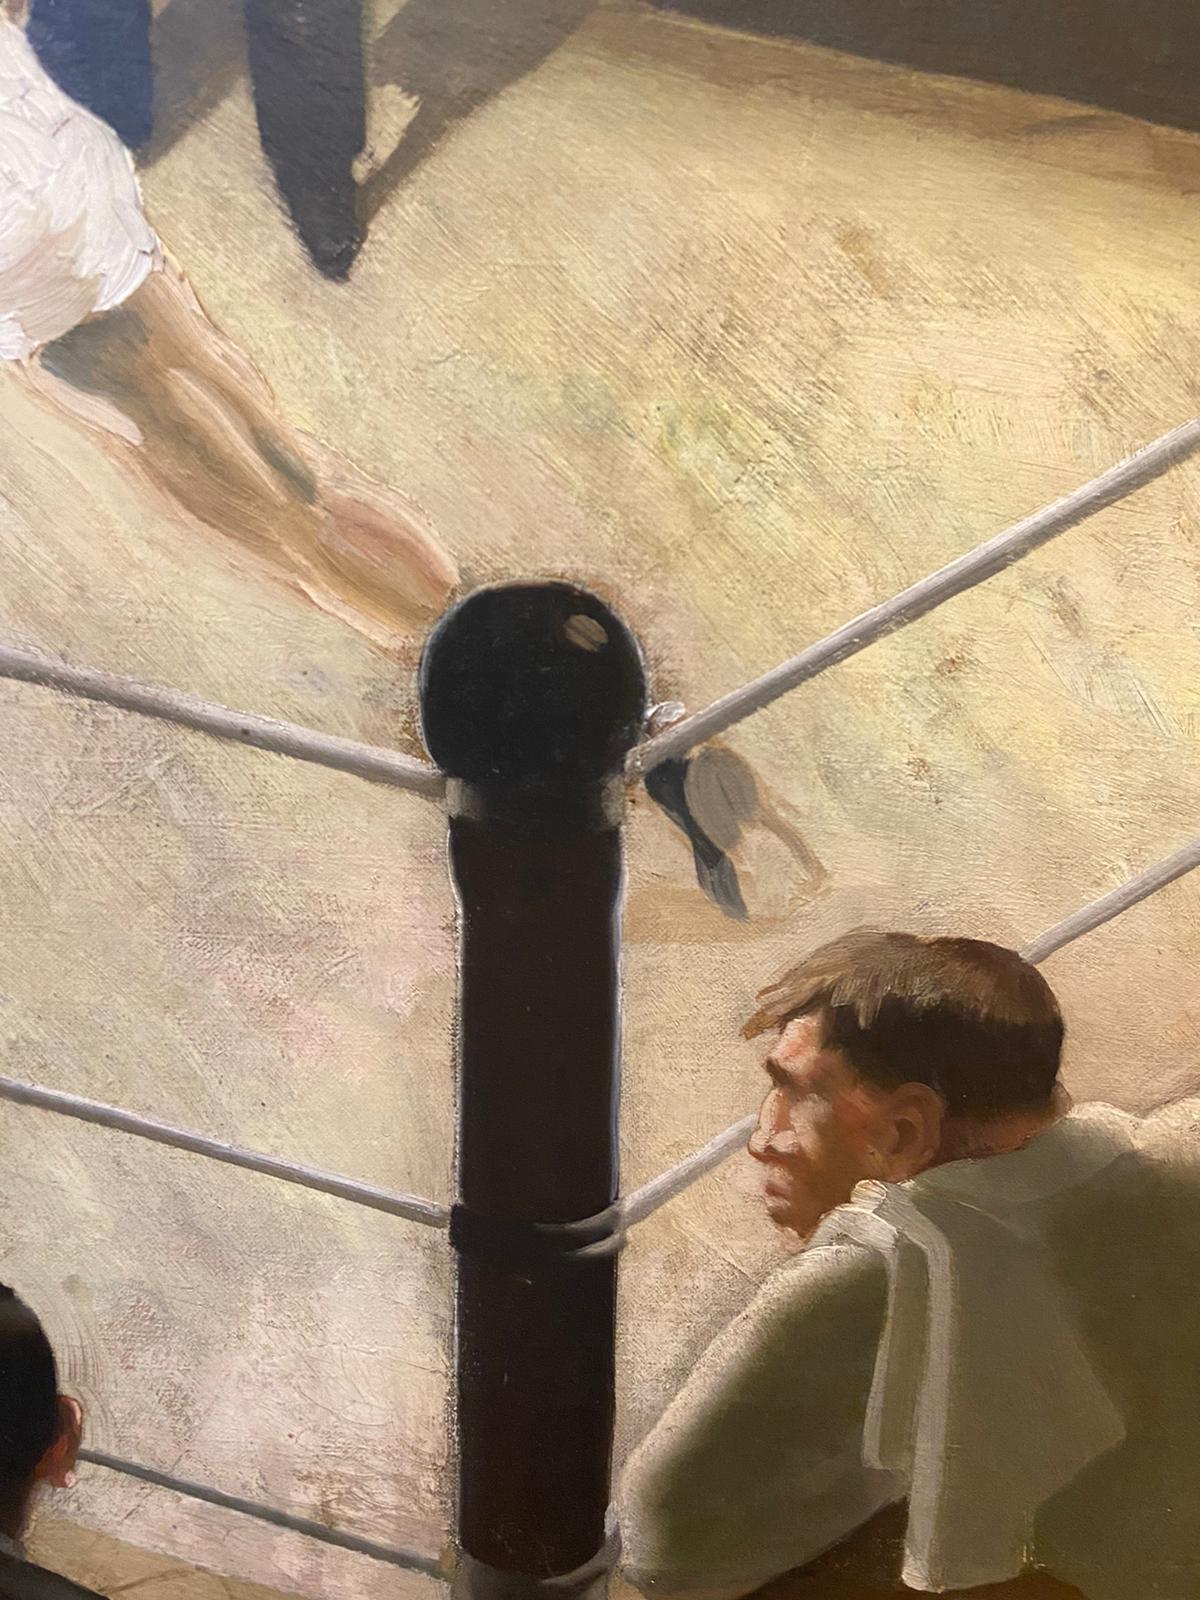 Anna Zinkeisen
1901-1976
A Boxing Tournment
Oil on canvas, signed lower right
Image size: 29 x 36.5 inches (73 x 93 cm)
Original hand made frame


A Boxing Tournament is a vivid and impactful snapshot of a professional boxing match from the late